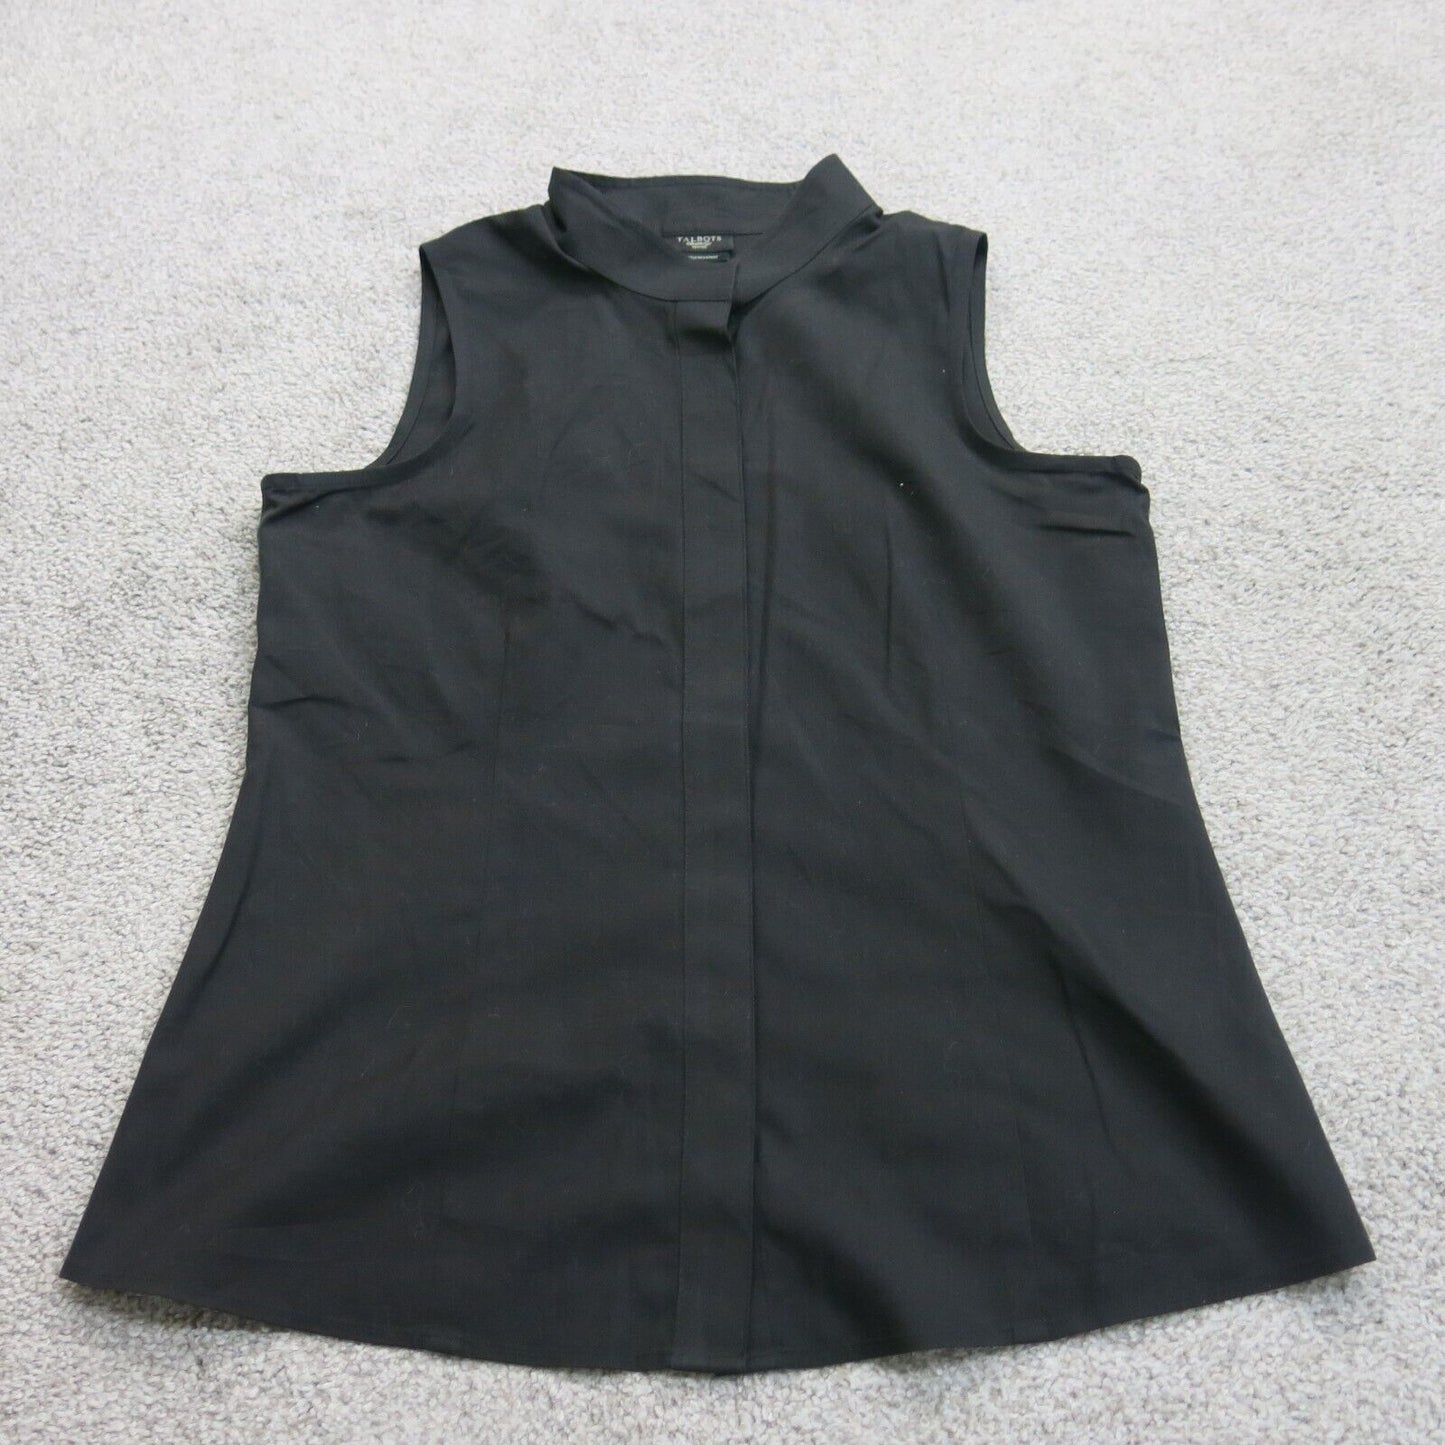 Talbots Womens Wrinkle Resistant Button Up Shirt Top Sleeveless Black Size 4P